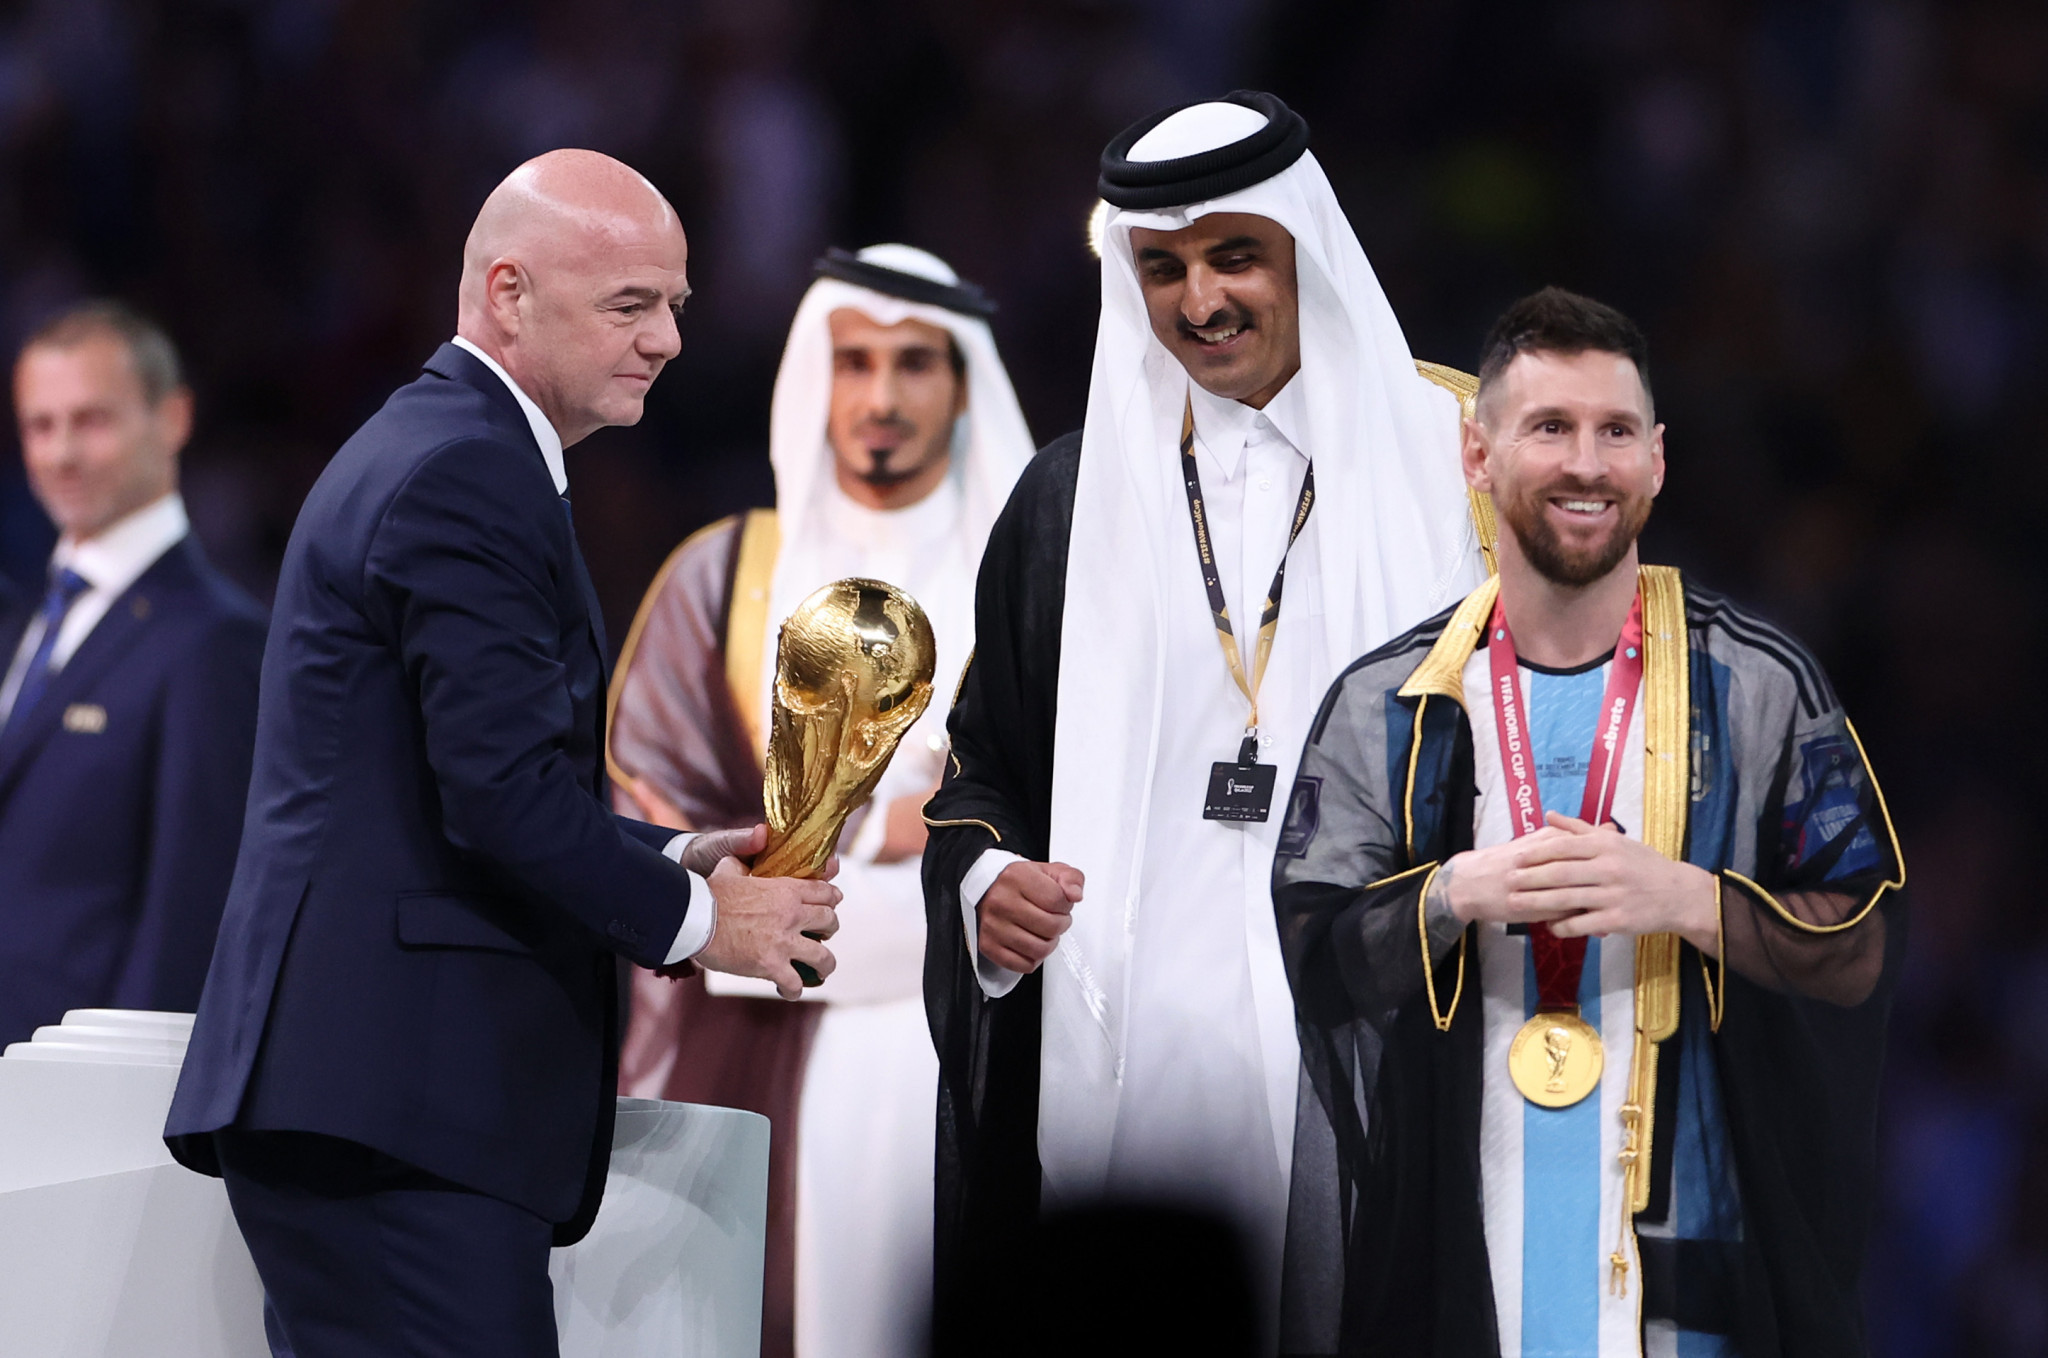 FIFA President Gianni Infantino, left, was reportedly spied on during a meeting with former Swiss Attorney General Michael Lauber by World Cup hosts Qatar ©Getty Images